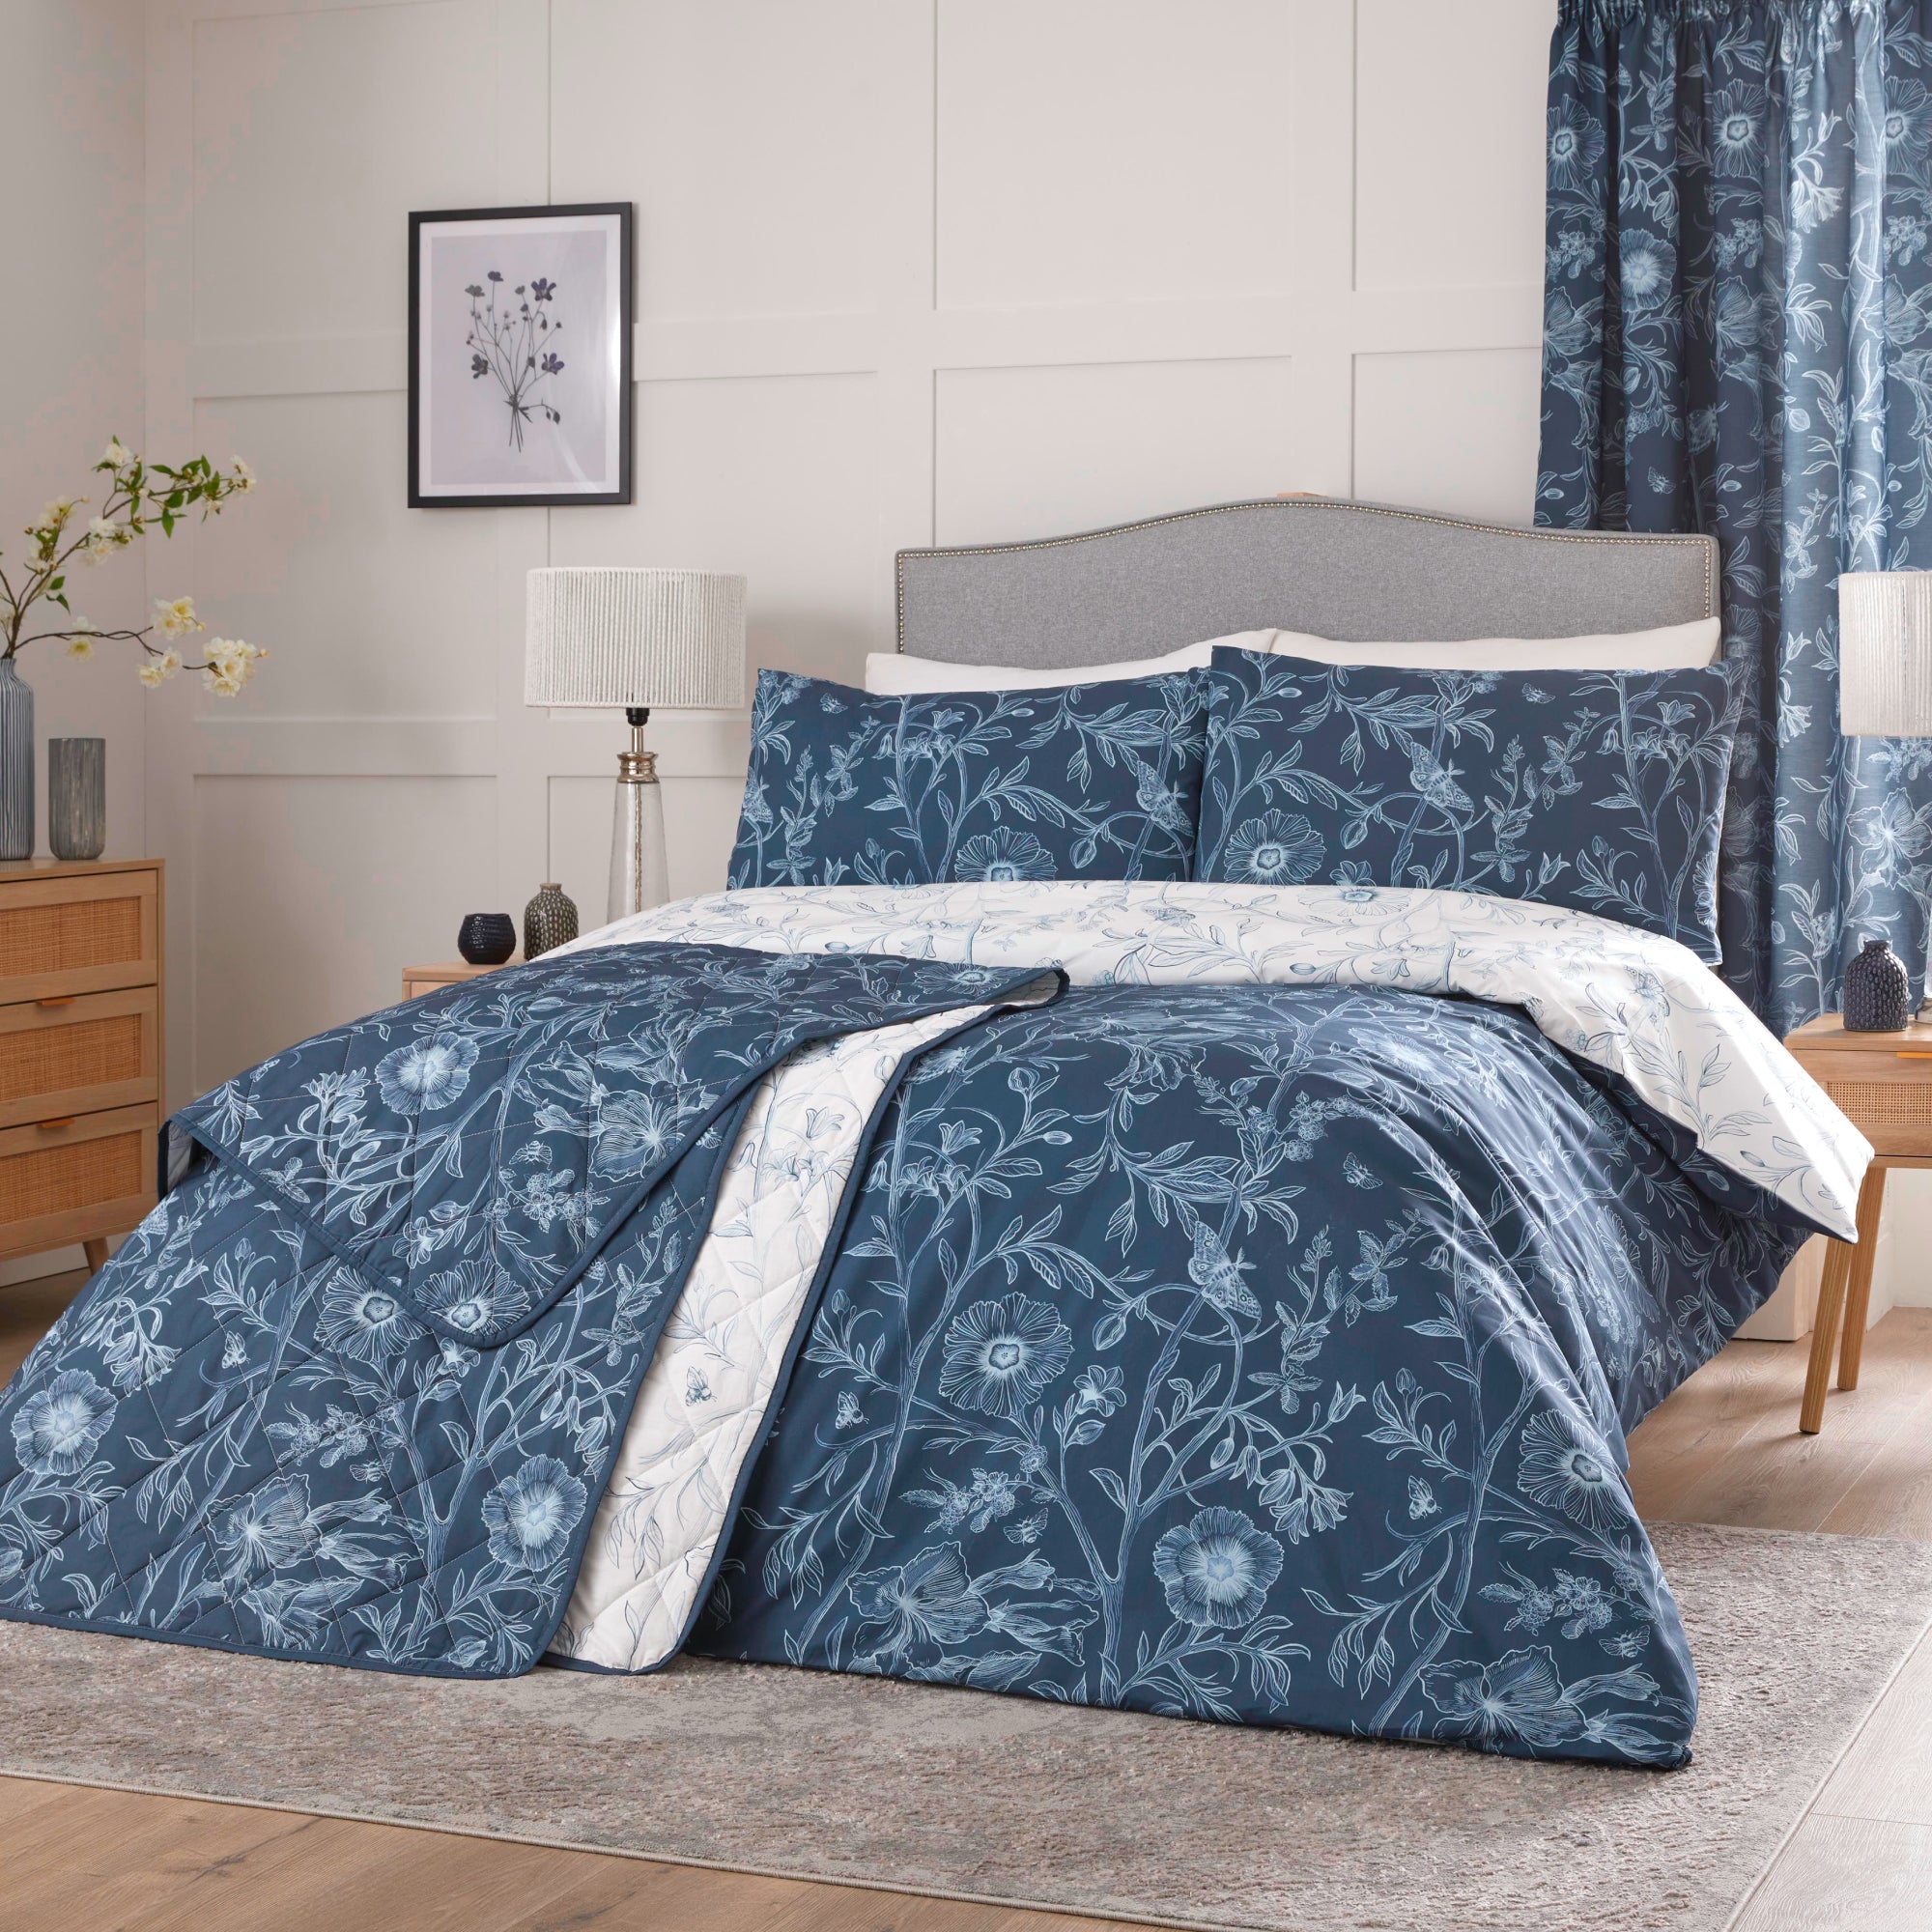 Duvet Cover Set Lorie by Dreams And Drapes Design in Blue